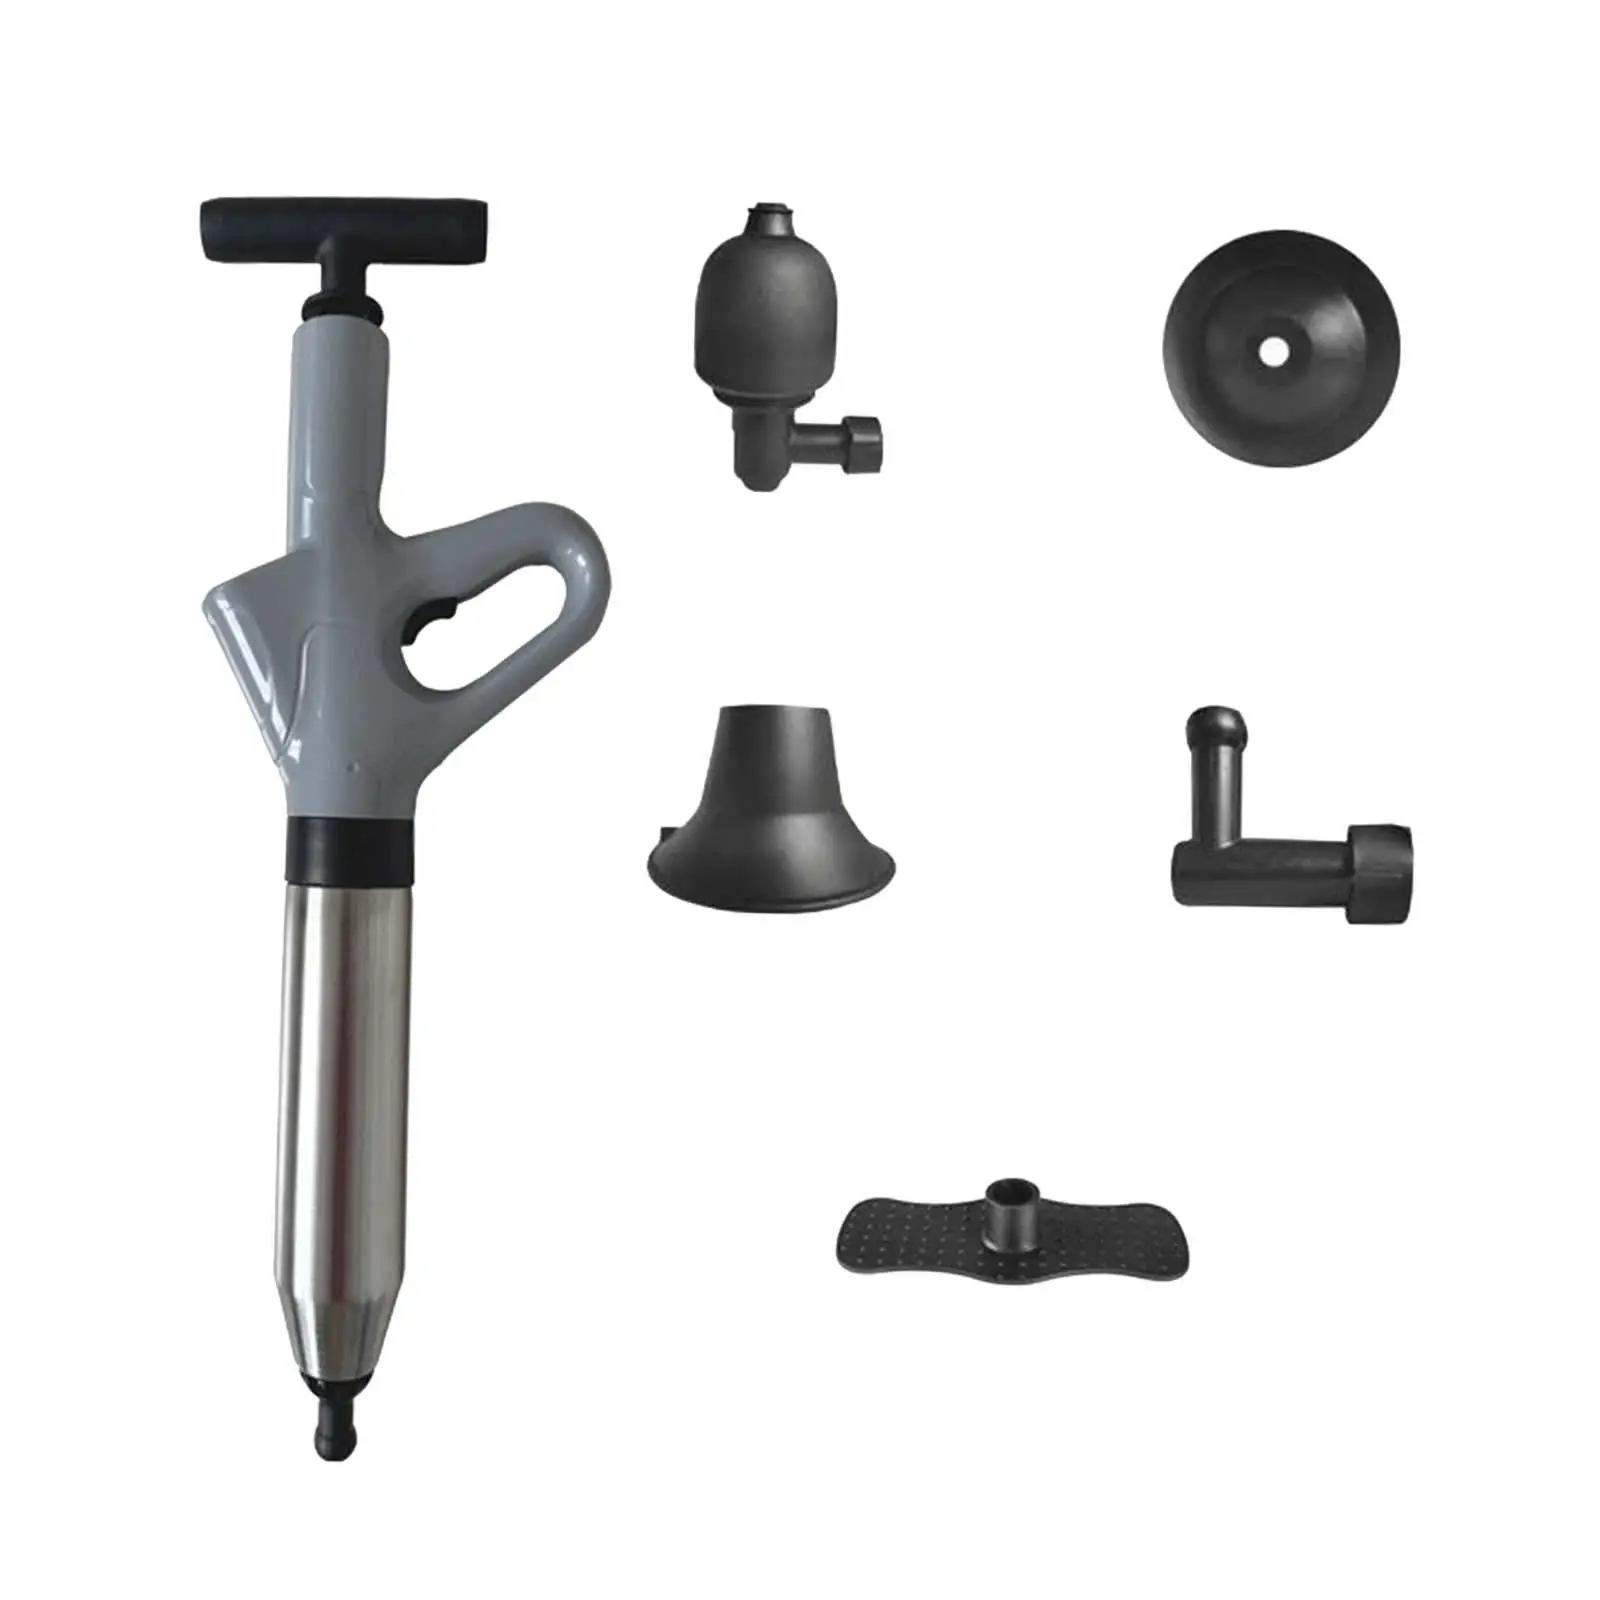 Toilet Air Pressure Plunger Pump with Interchangeable Plunger Heads High Pressure Air Drain Pipe Plunger for Sinks Washbasin